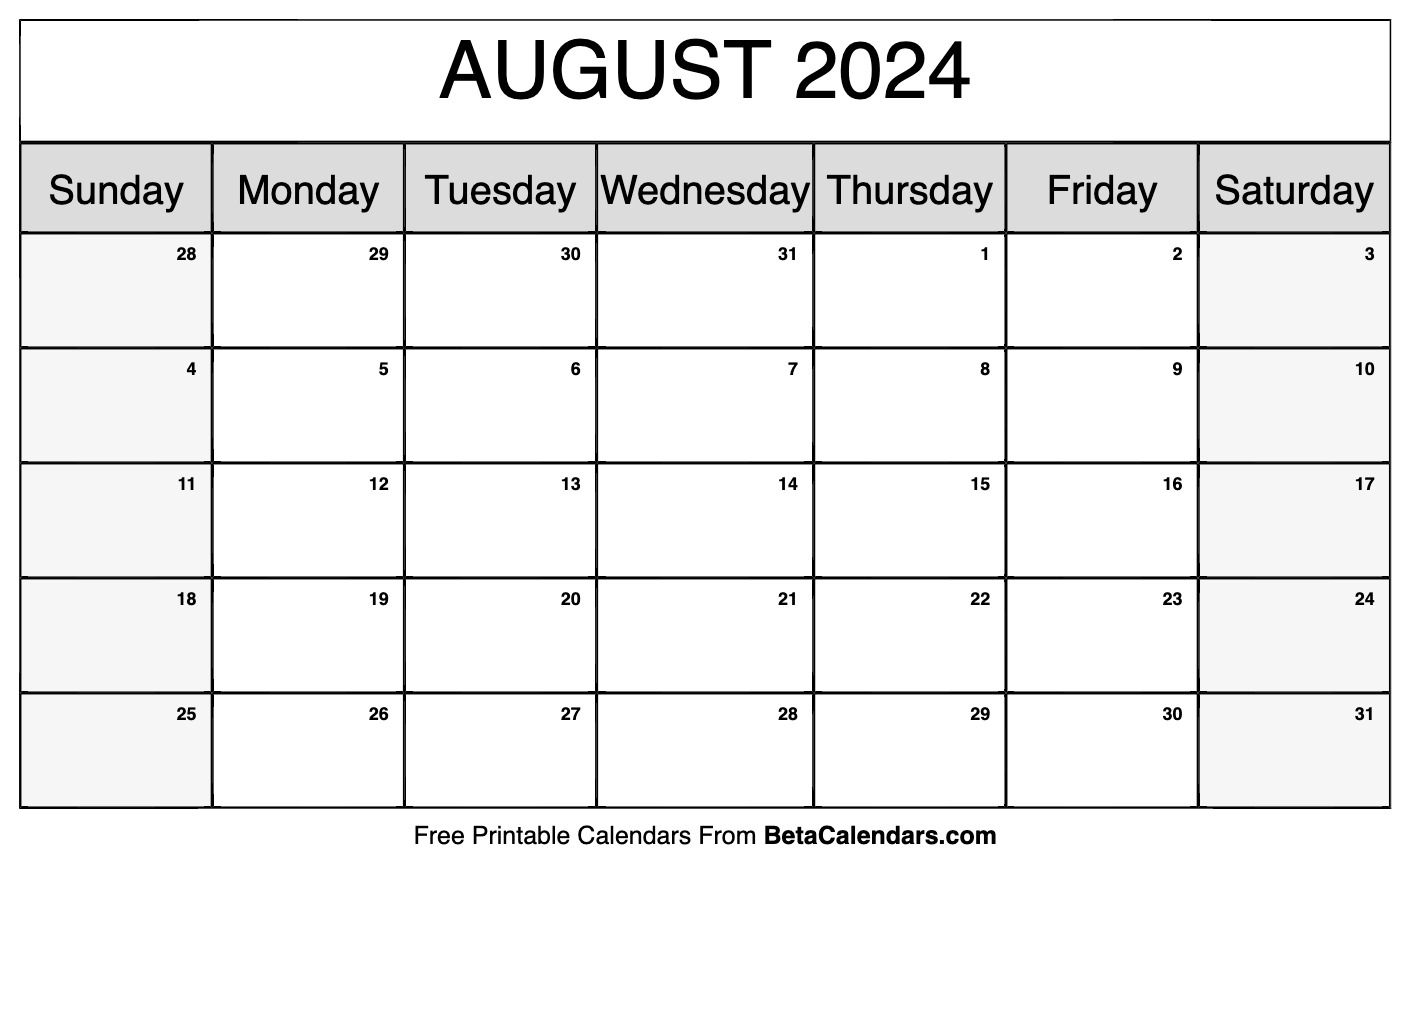 August, 2020